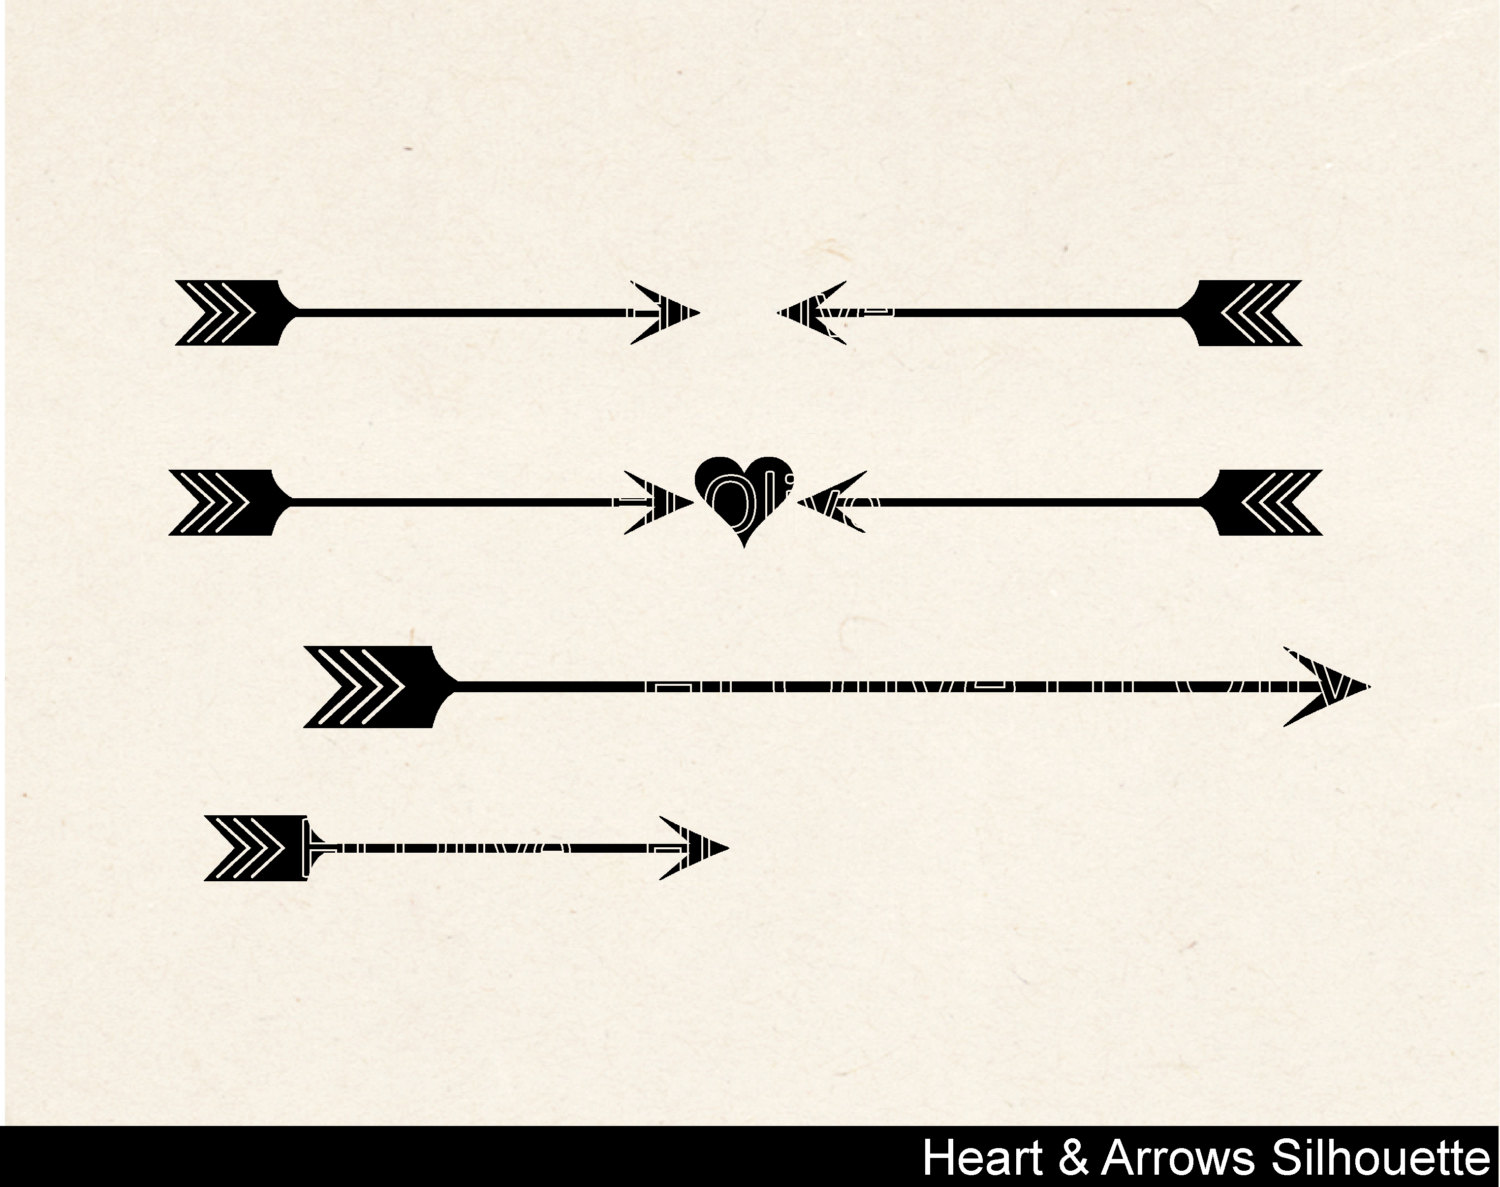 Heart And Arrow Silhouette Clip Artblack Clip By Hiolive On Etsy